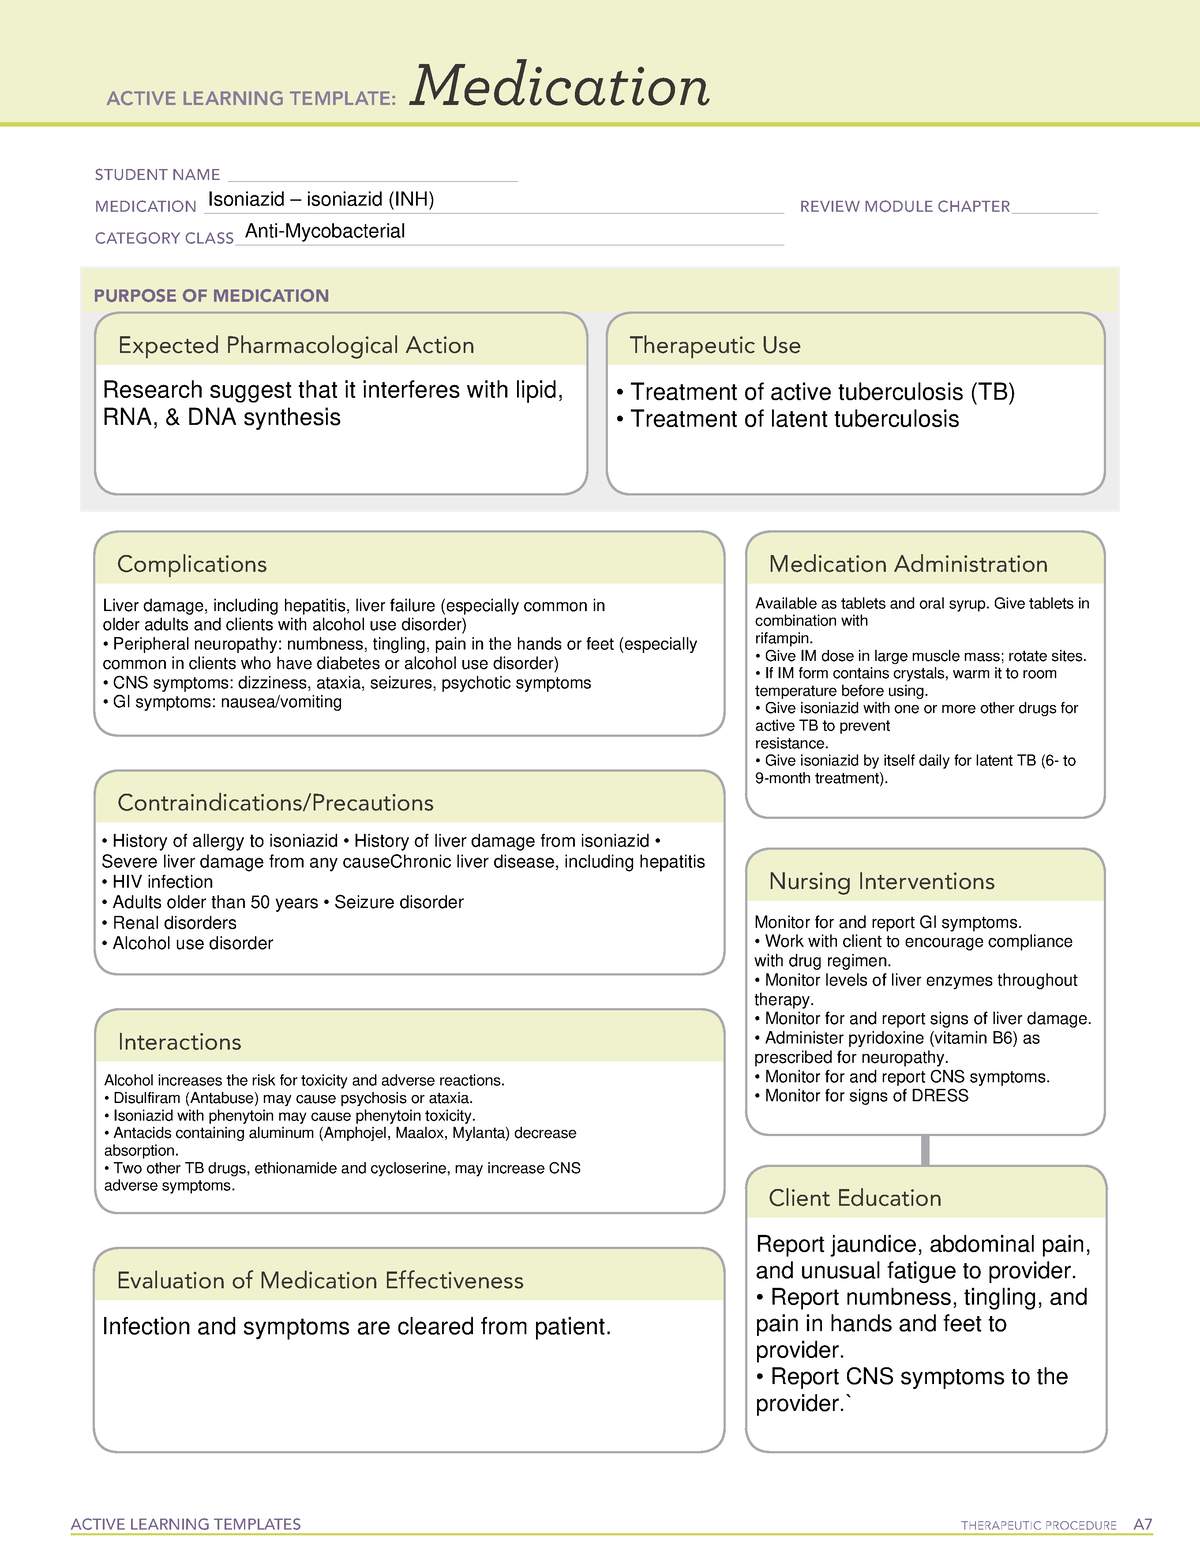 ATI Isoniazid isoniazid (INH) Med Sheet ACTIVE LEARNING TEMPLATE